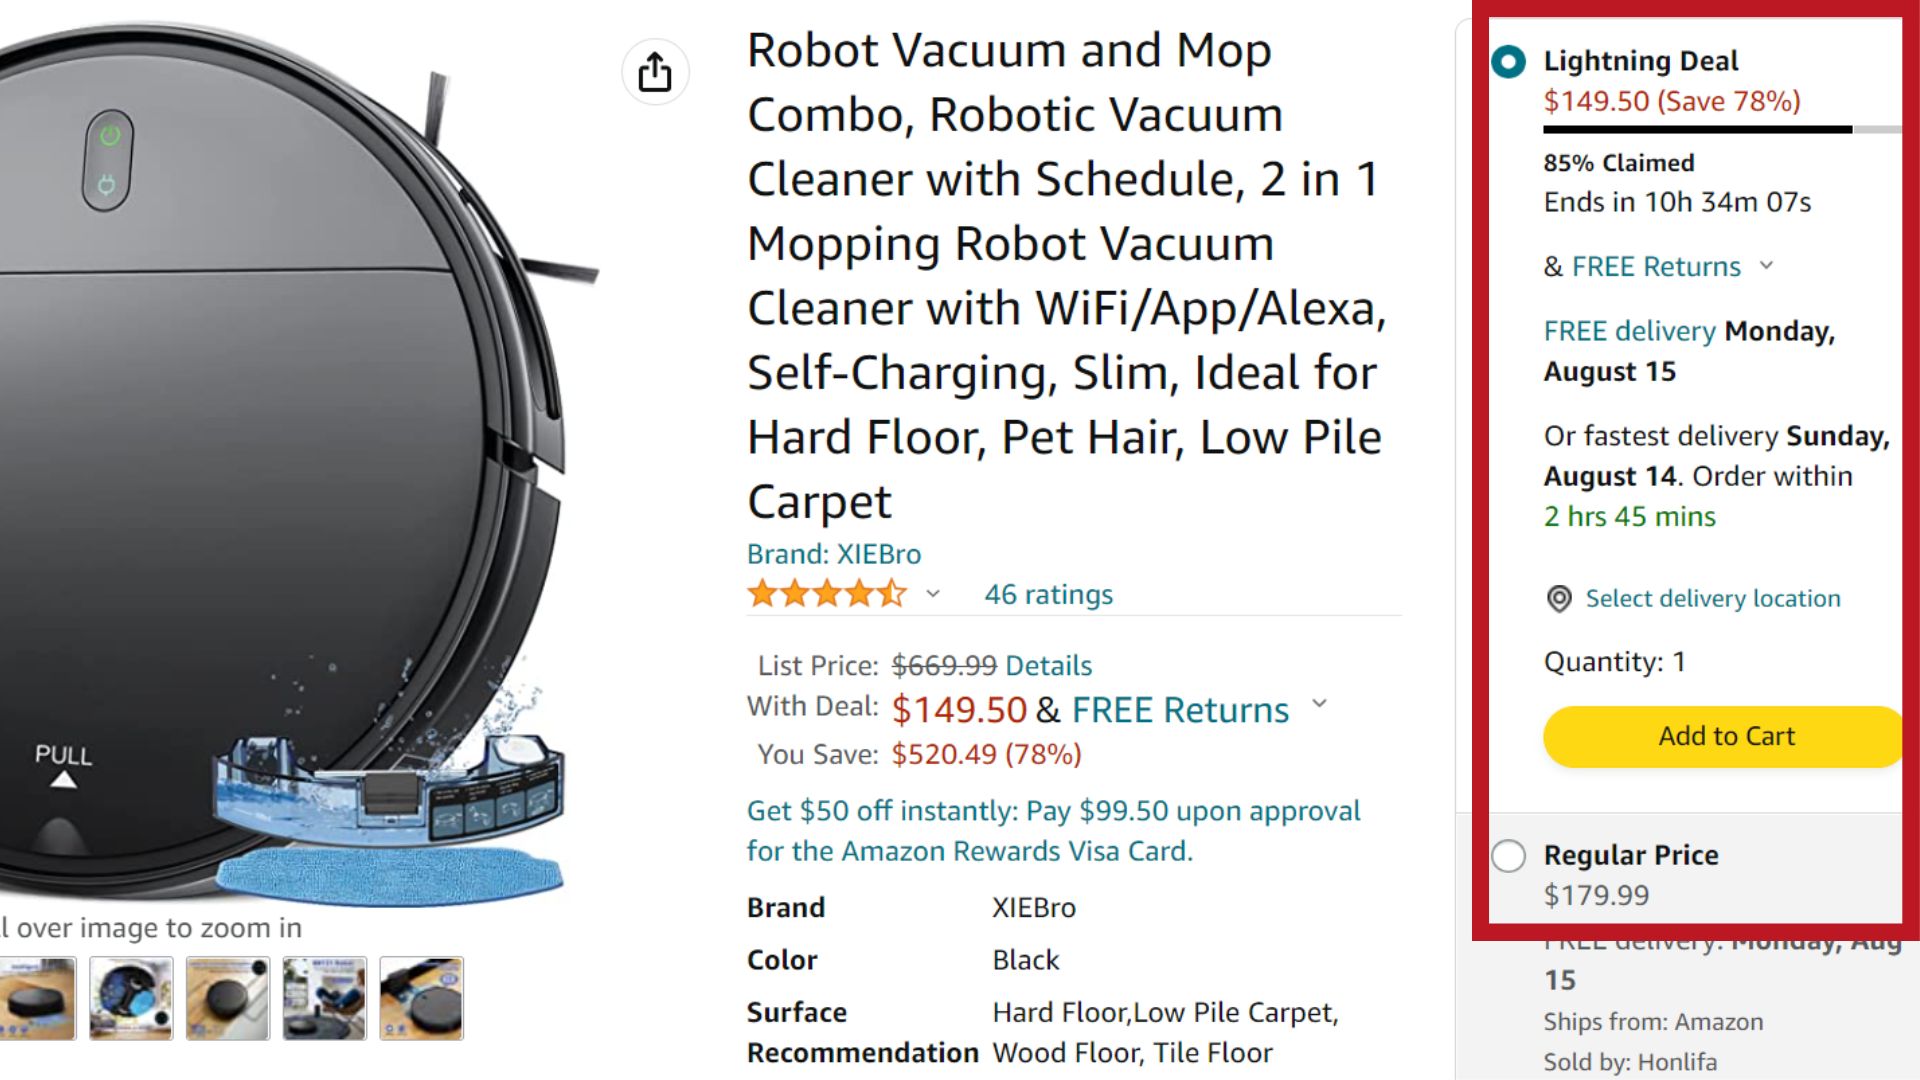 Example of Amazon Lightning Deal for Robot Vacuum